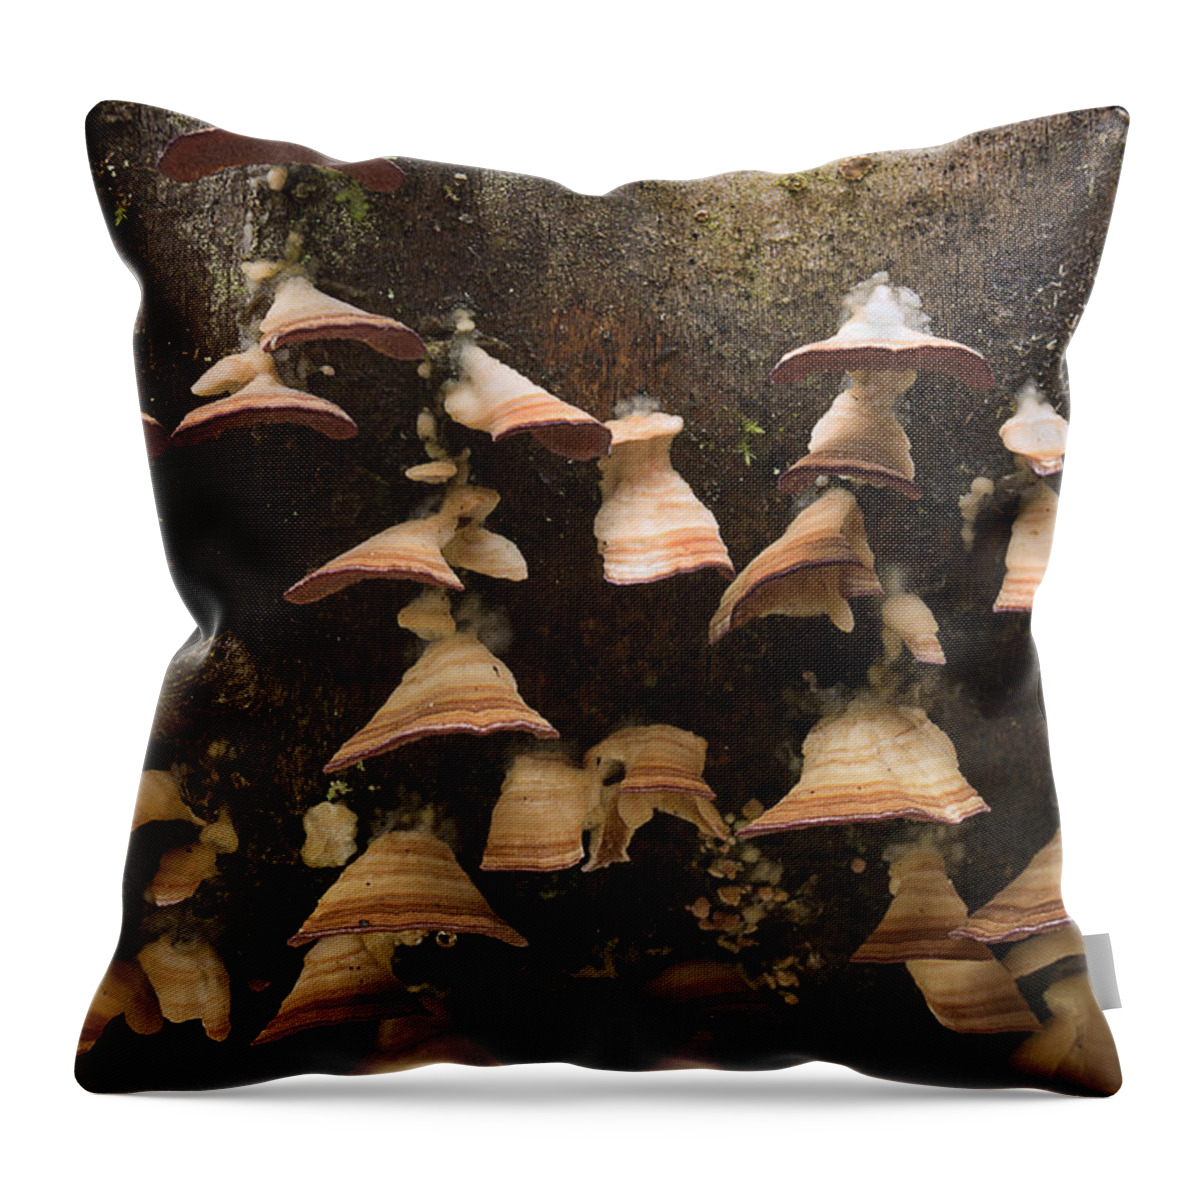 Fungus Throw Pillow featuring the photograph Hanging On by Mike Eingle